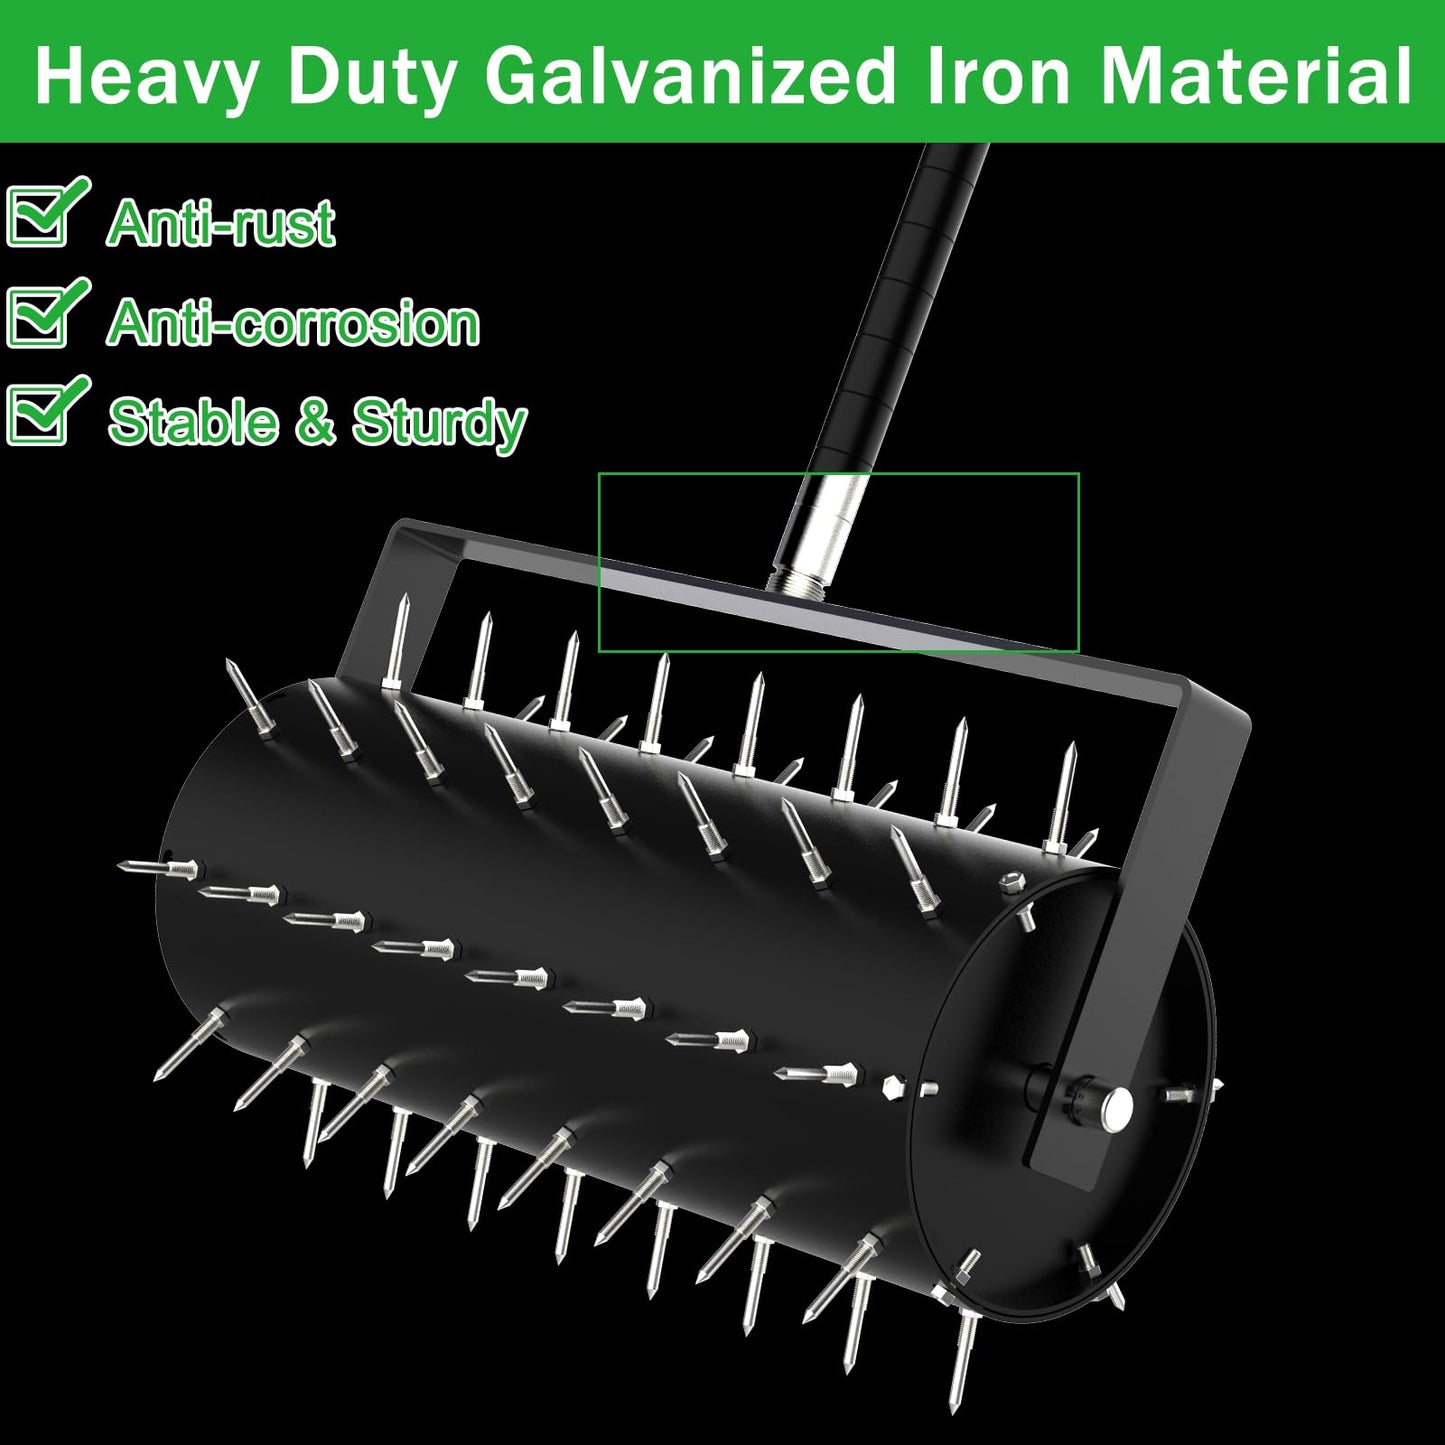 Rolling Lawn Aerator Manual Aeration Tool Heavy Duty Grass Dethatching Aeration Tool with 60 Inch Handle for Yard Garden Lawn Bearing Design, Labor Saving